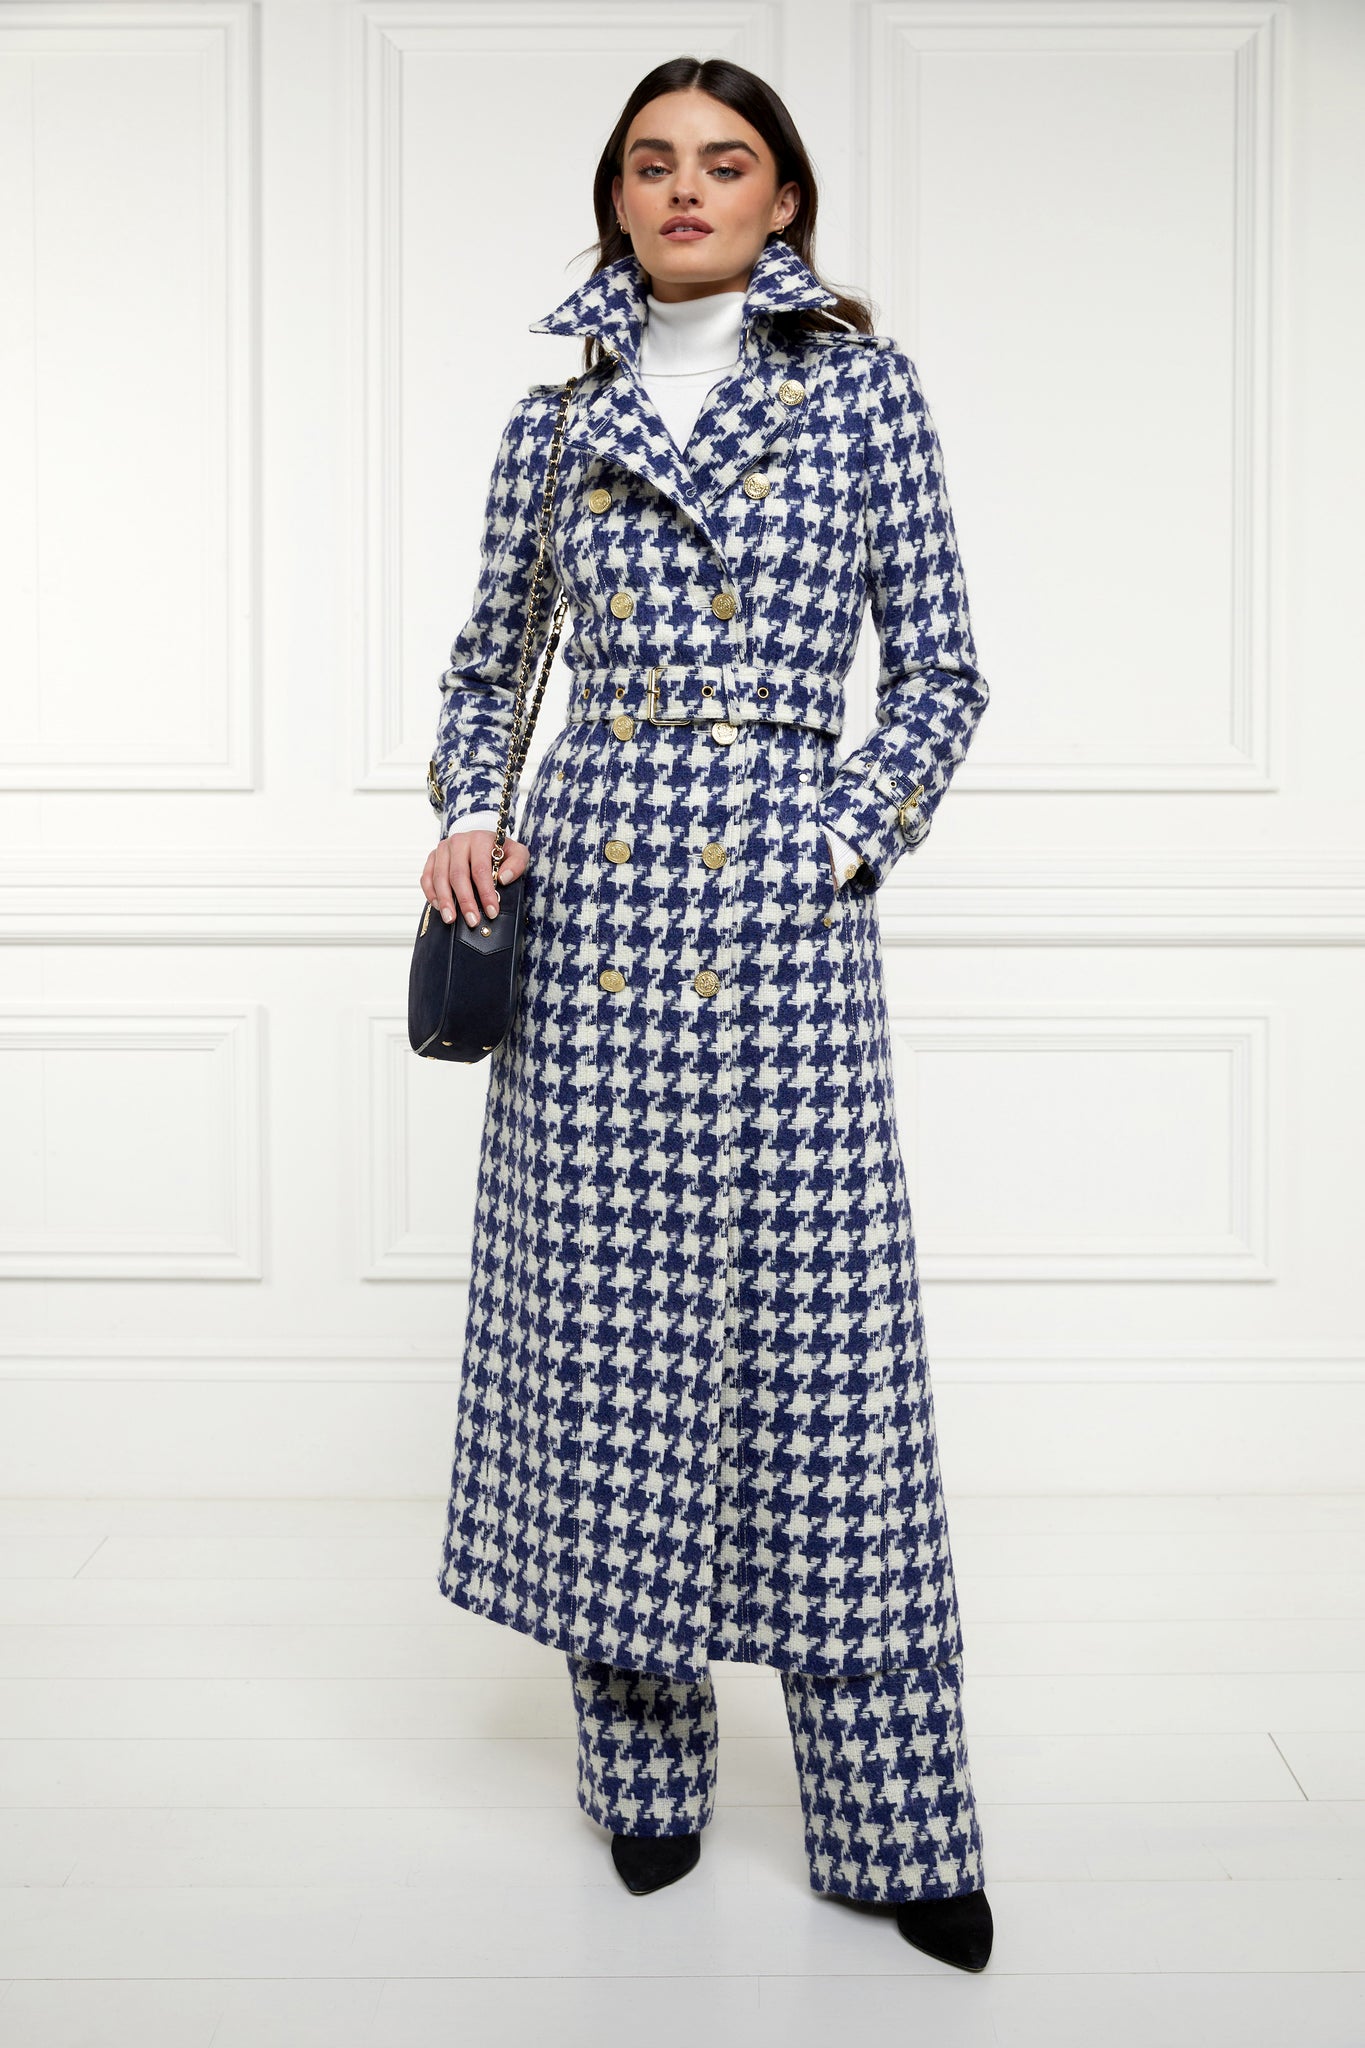 The Large Scale Navy Houndstooth Suit